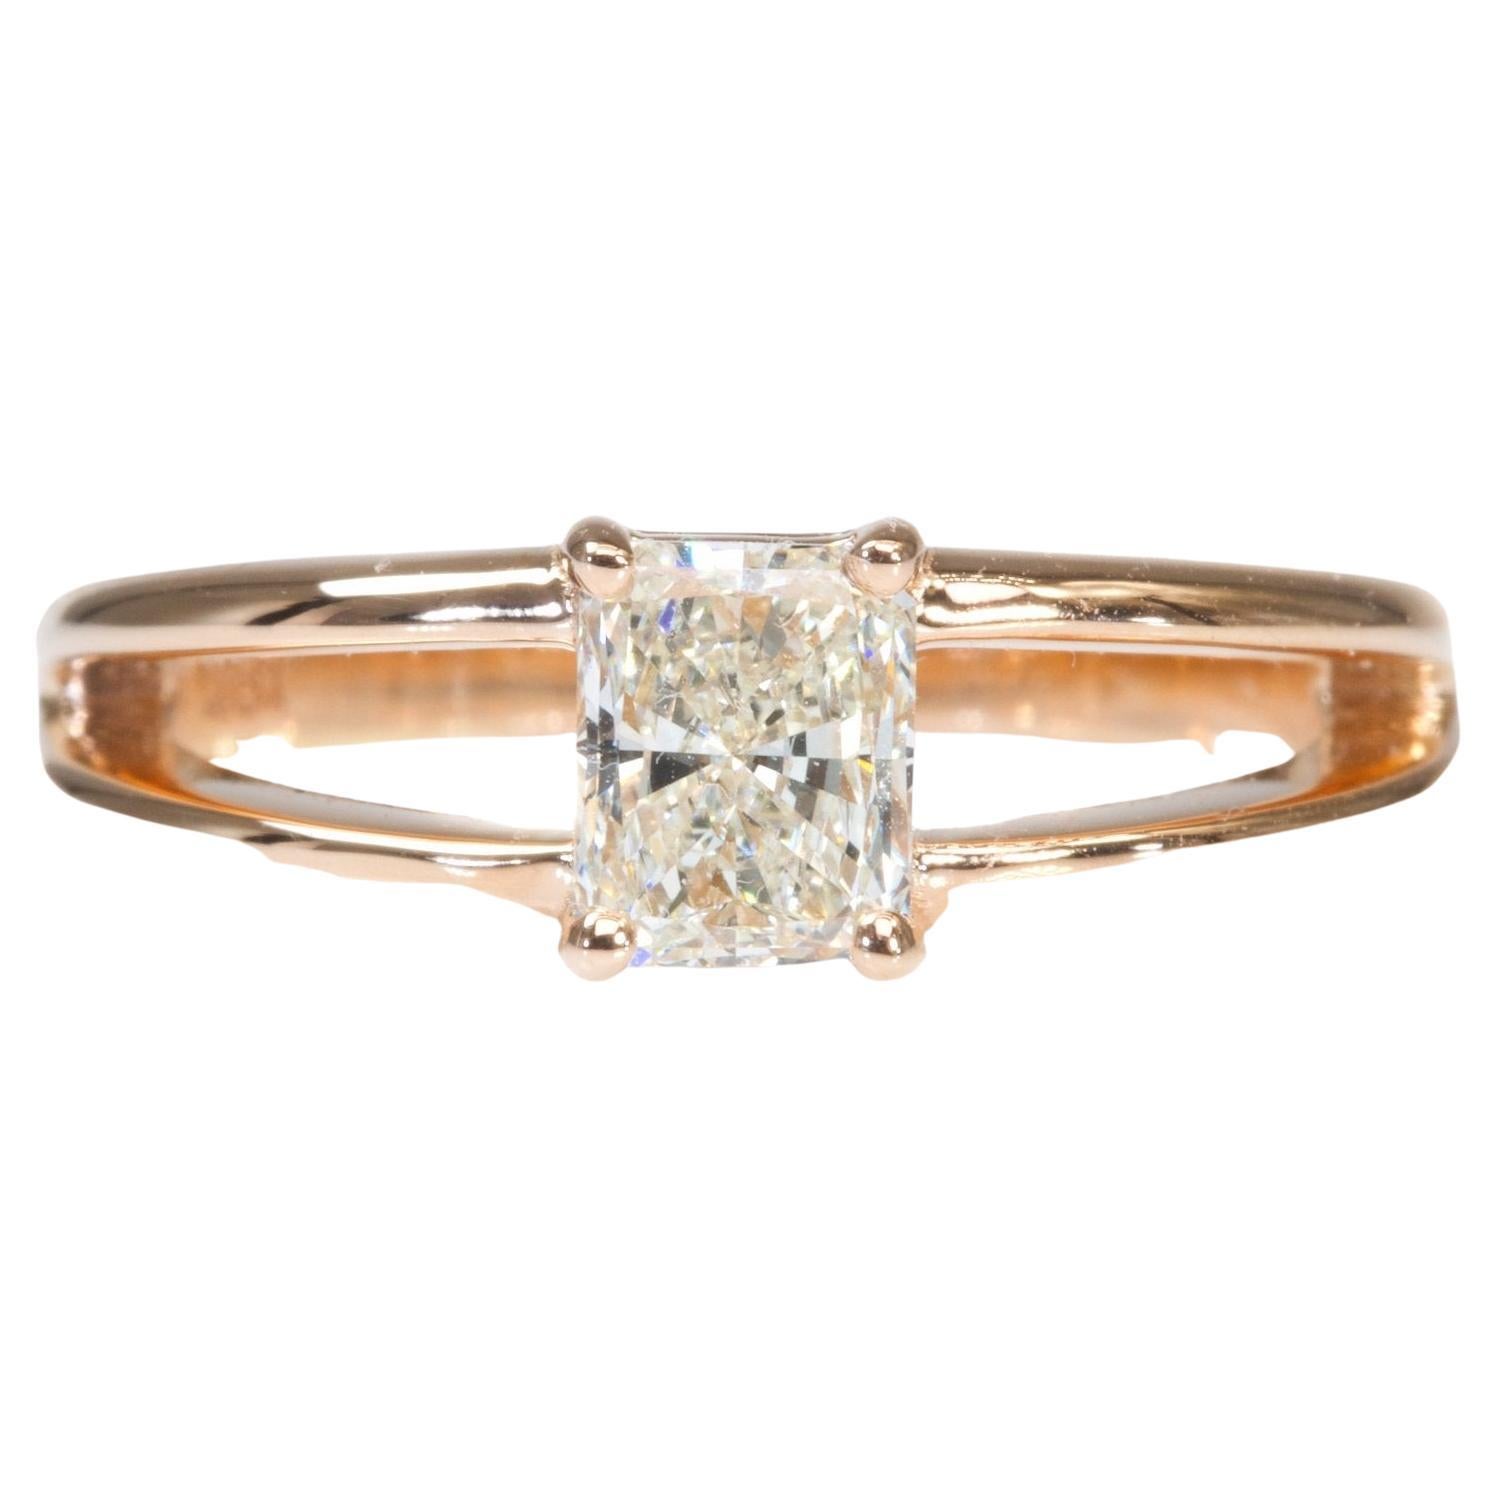 Stunning 18K Rose Gold Ring with 0.50 carat Natural Diamond- GIA Certificate For Sale